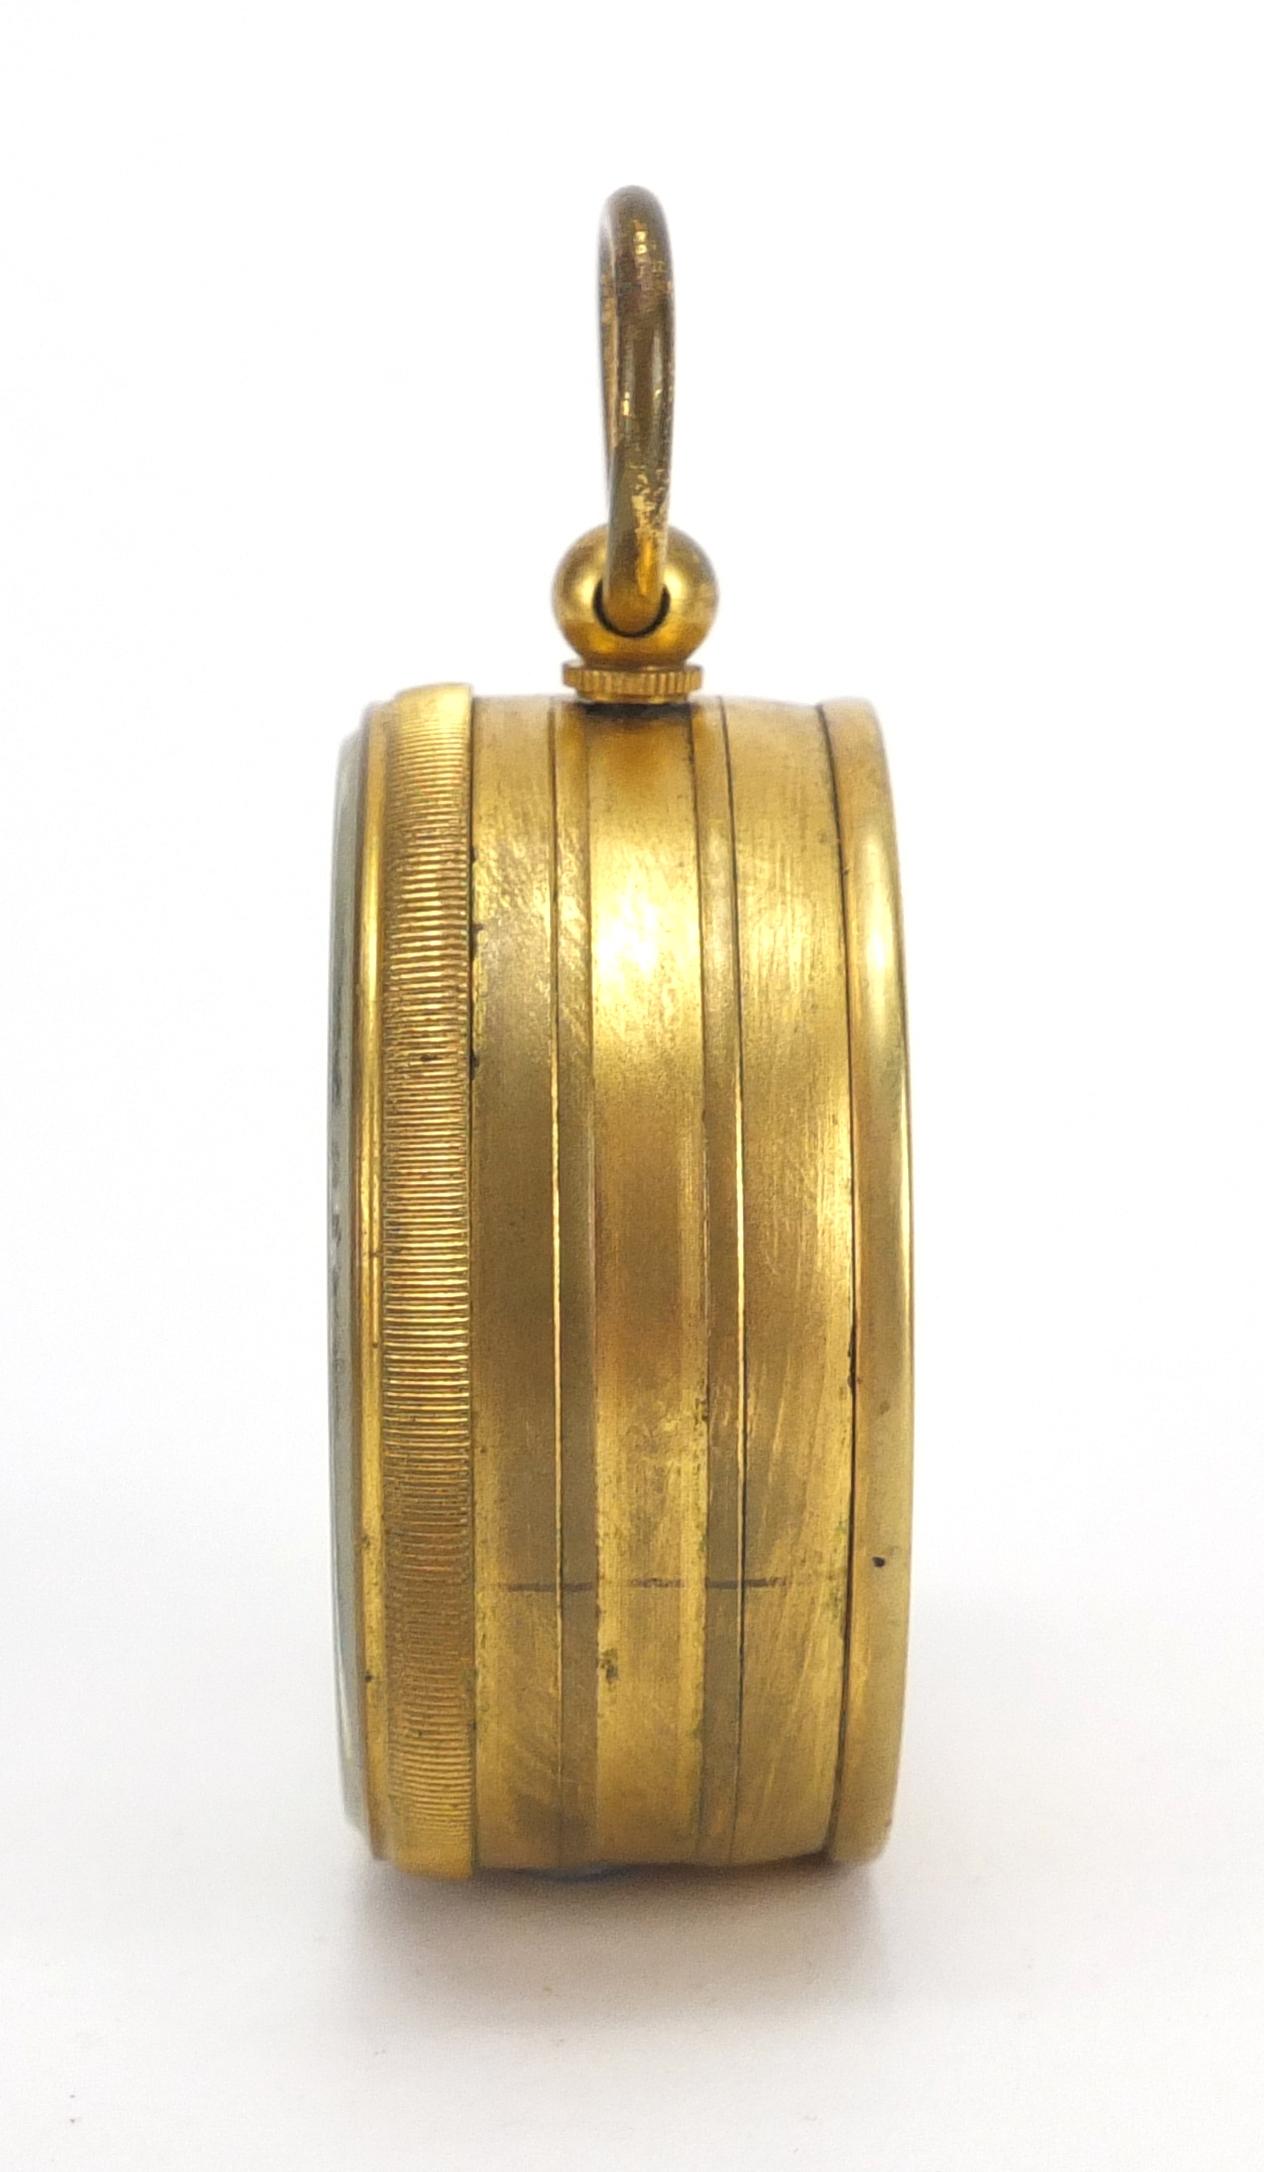 19th century gilt brass pocket weath station with compensated barometer, thermometer and compass, - Image 3 of 8